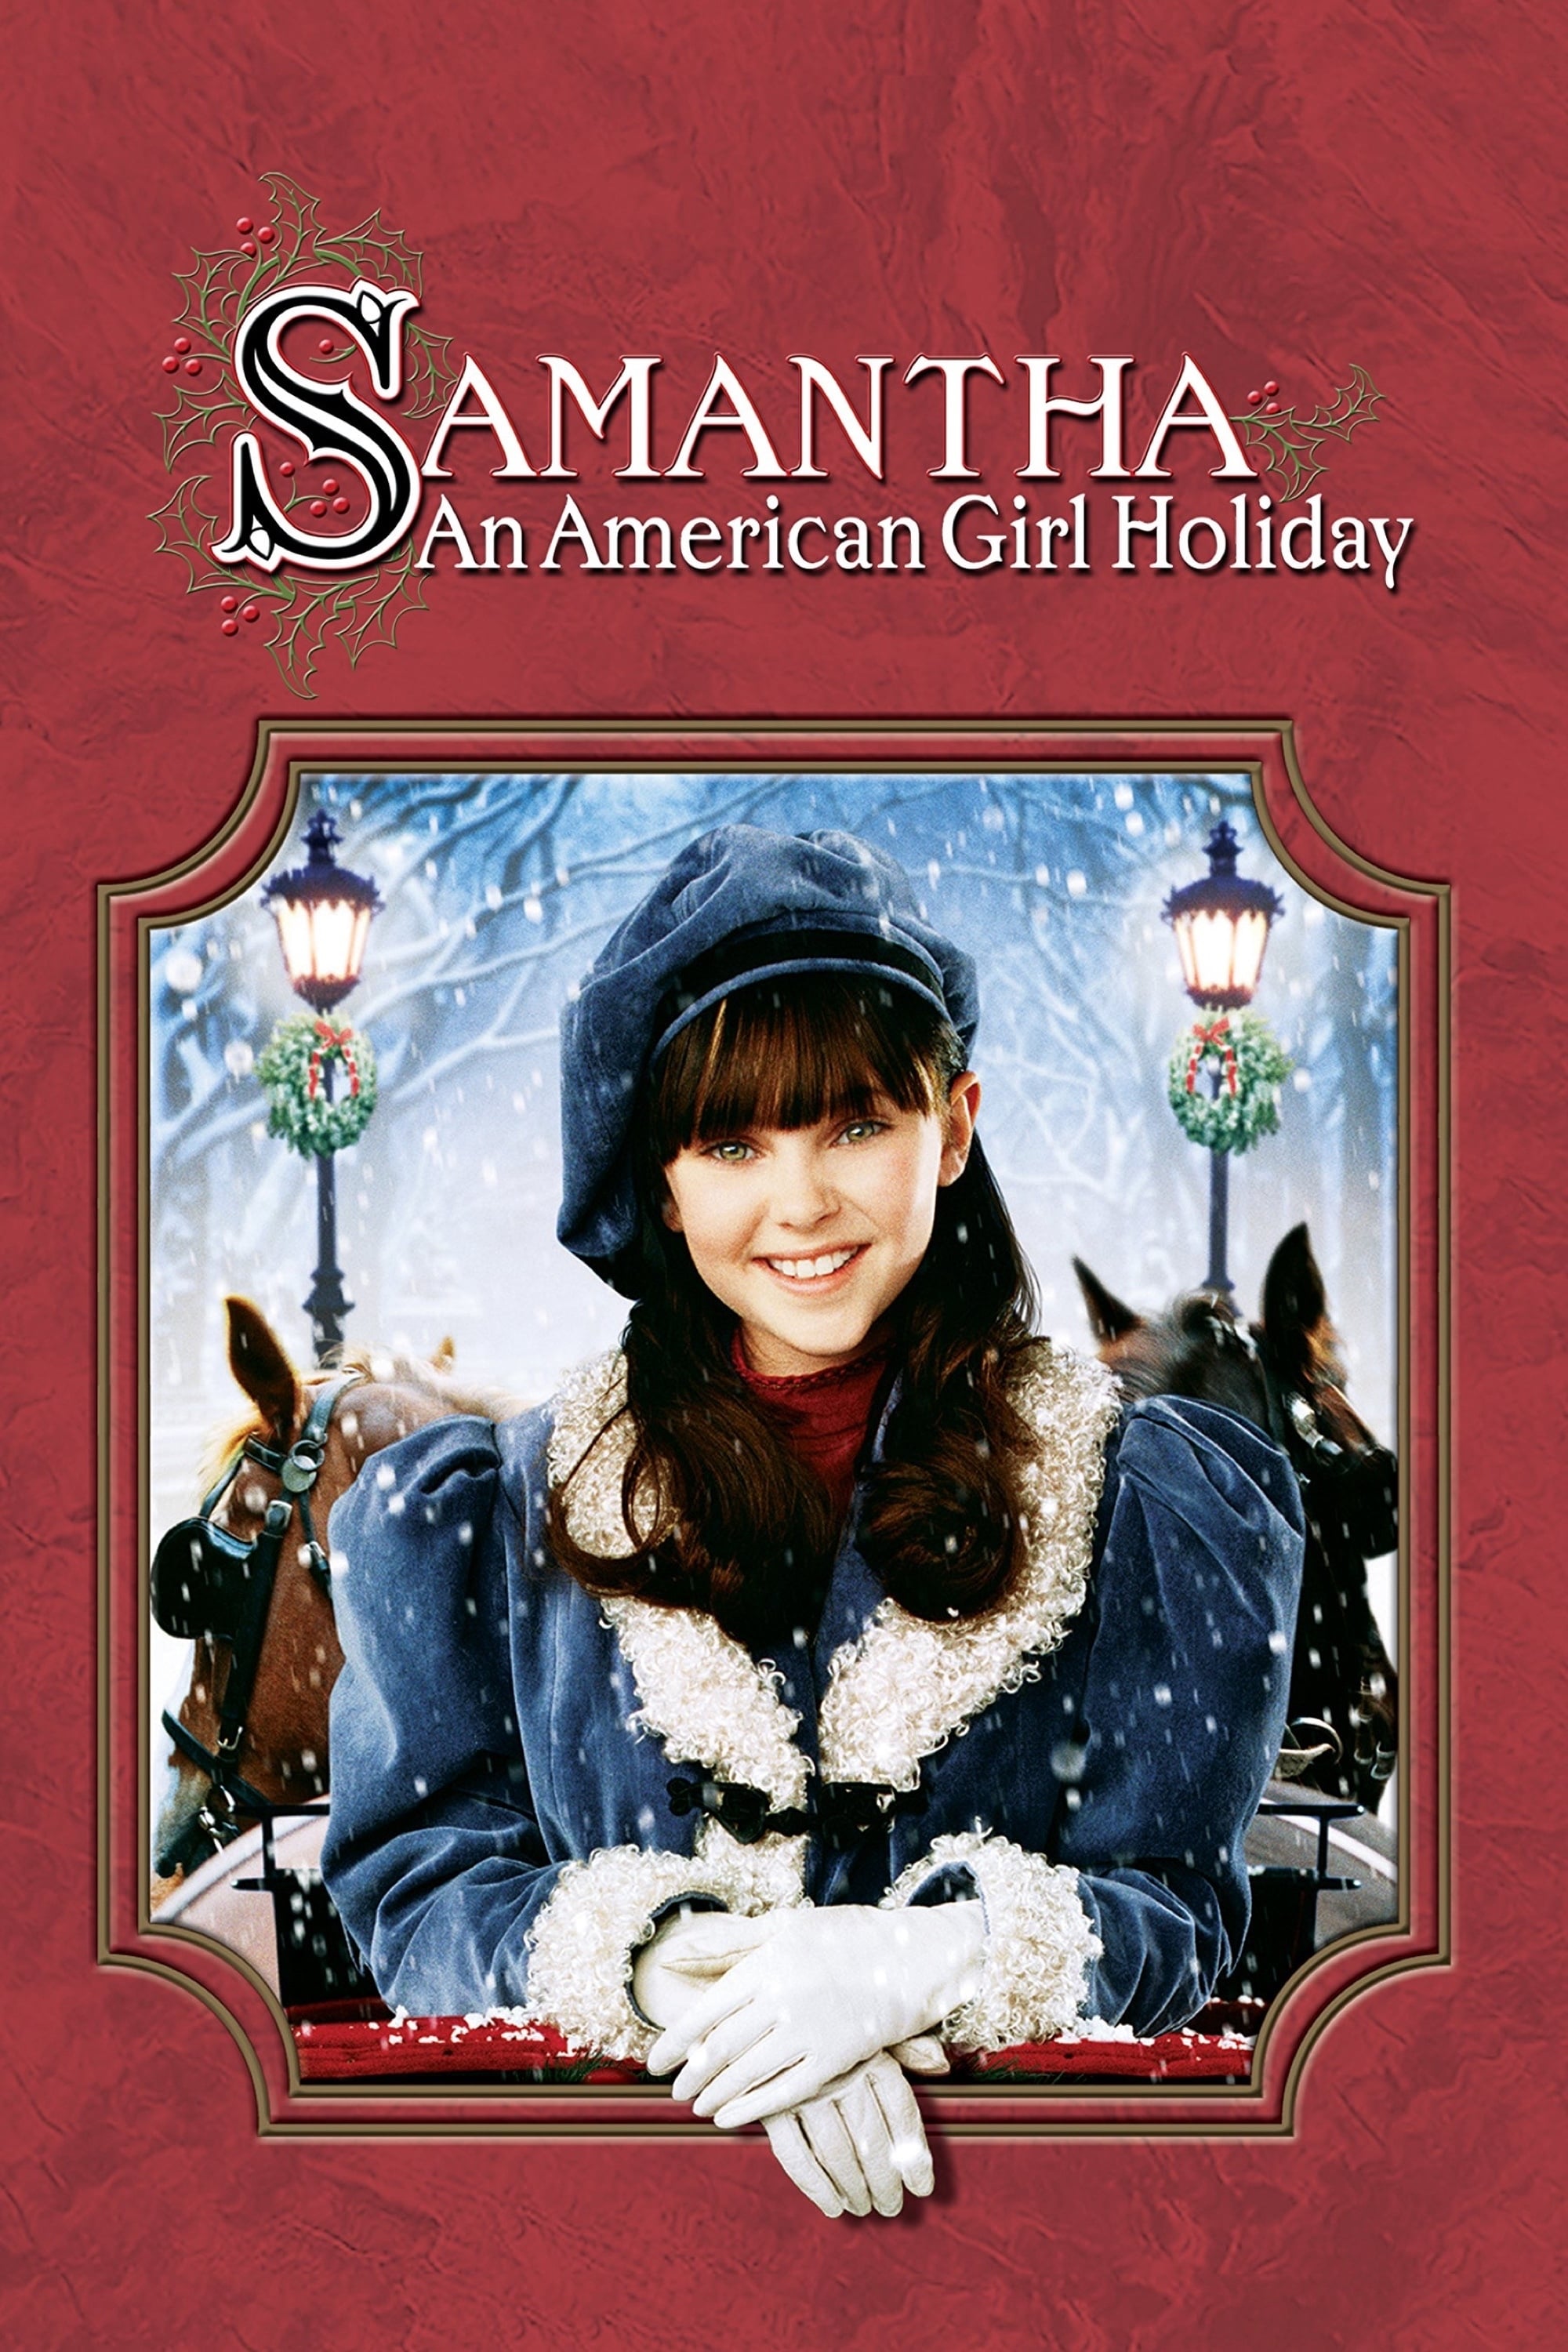 watch samantha an american girl holiday online free